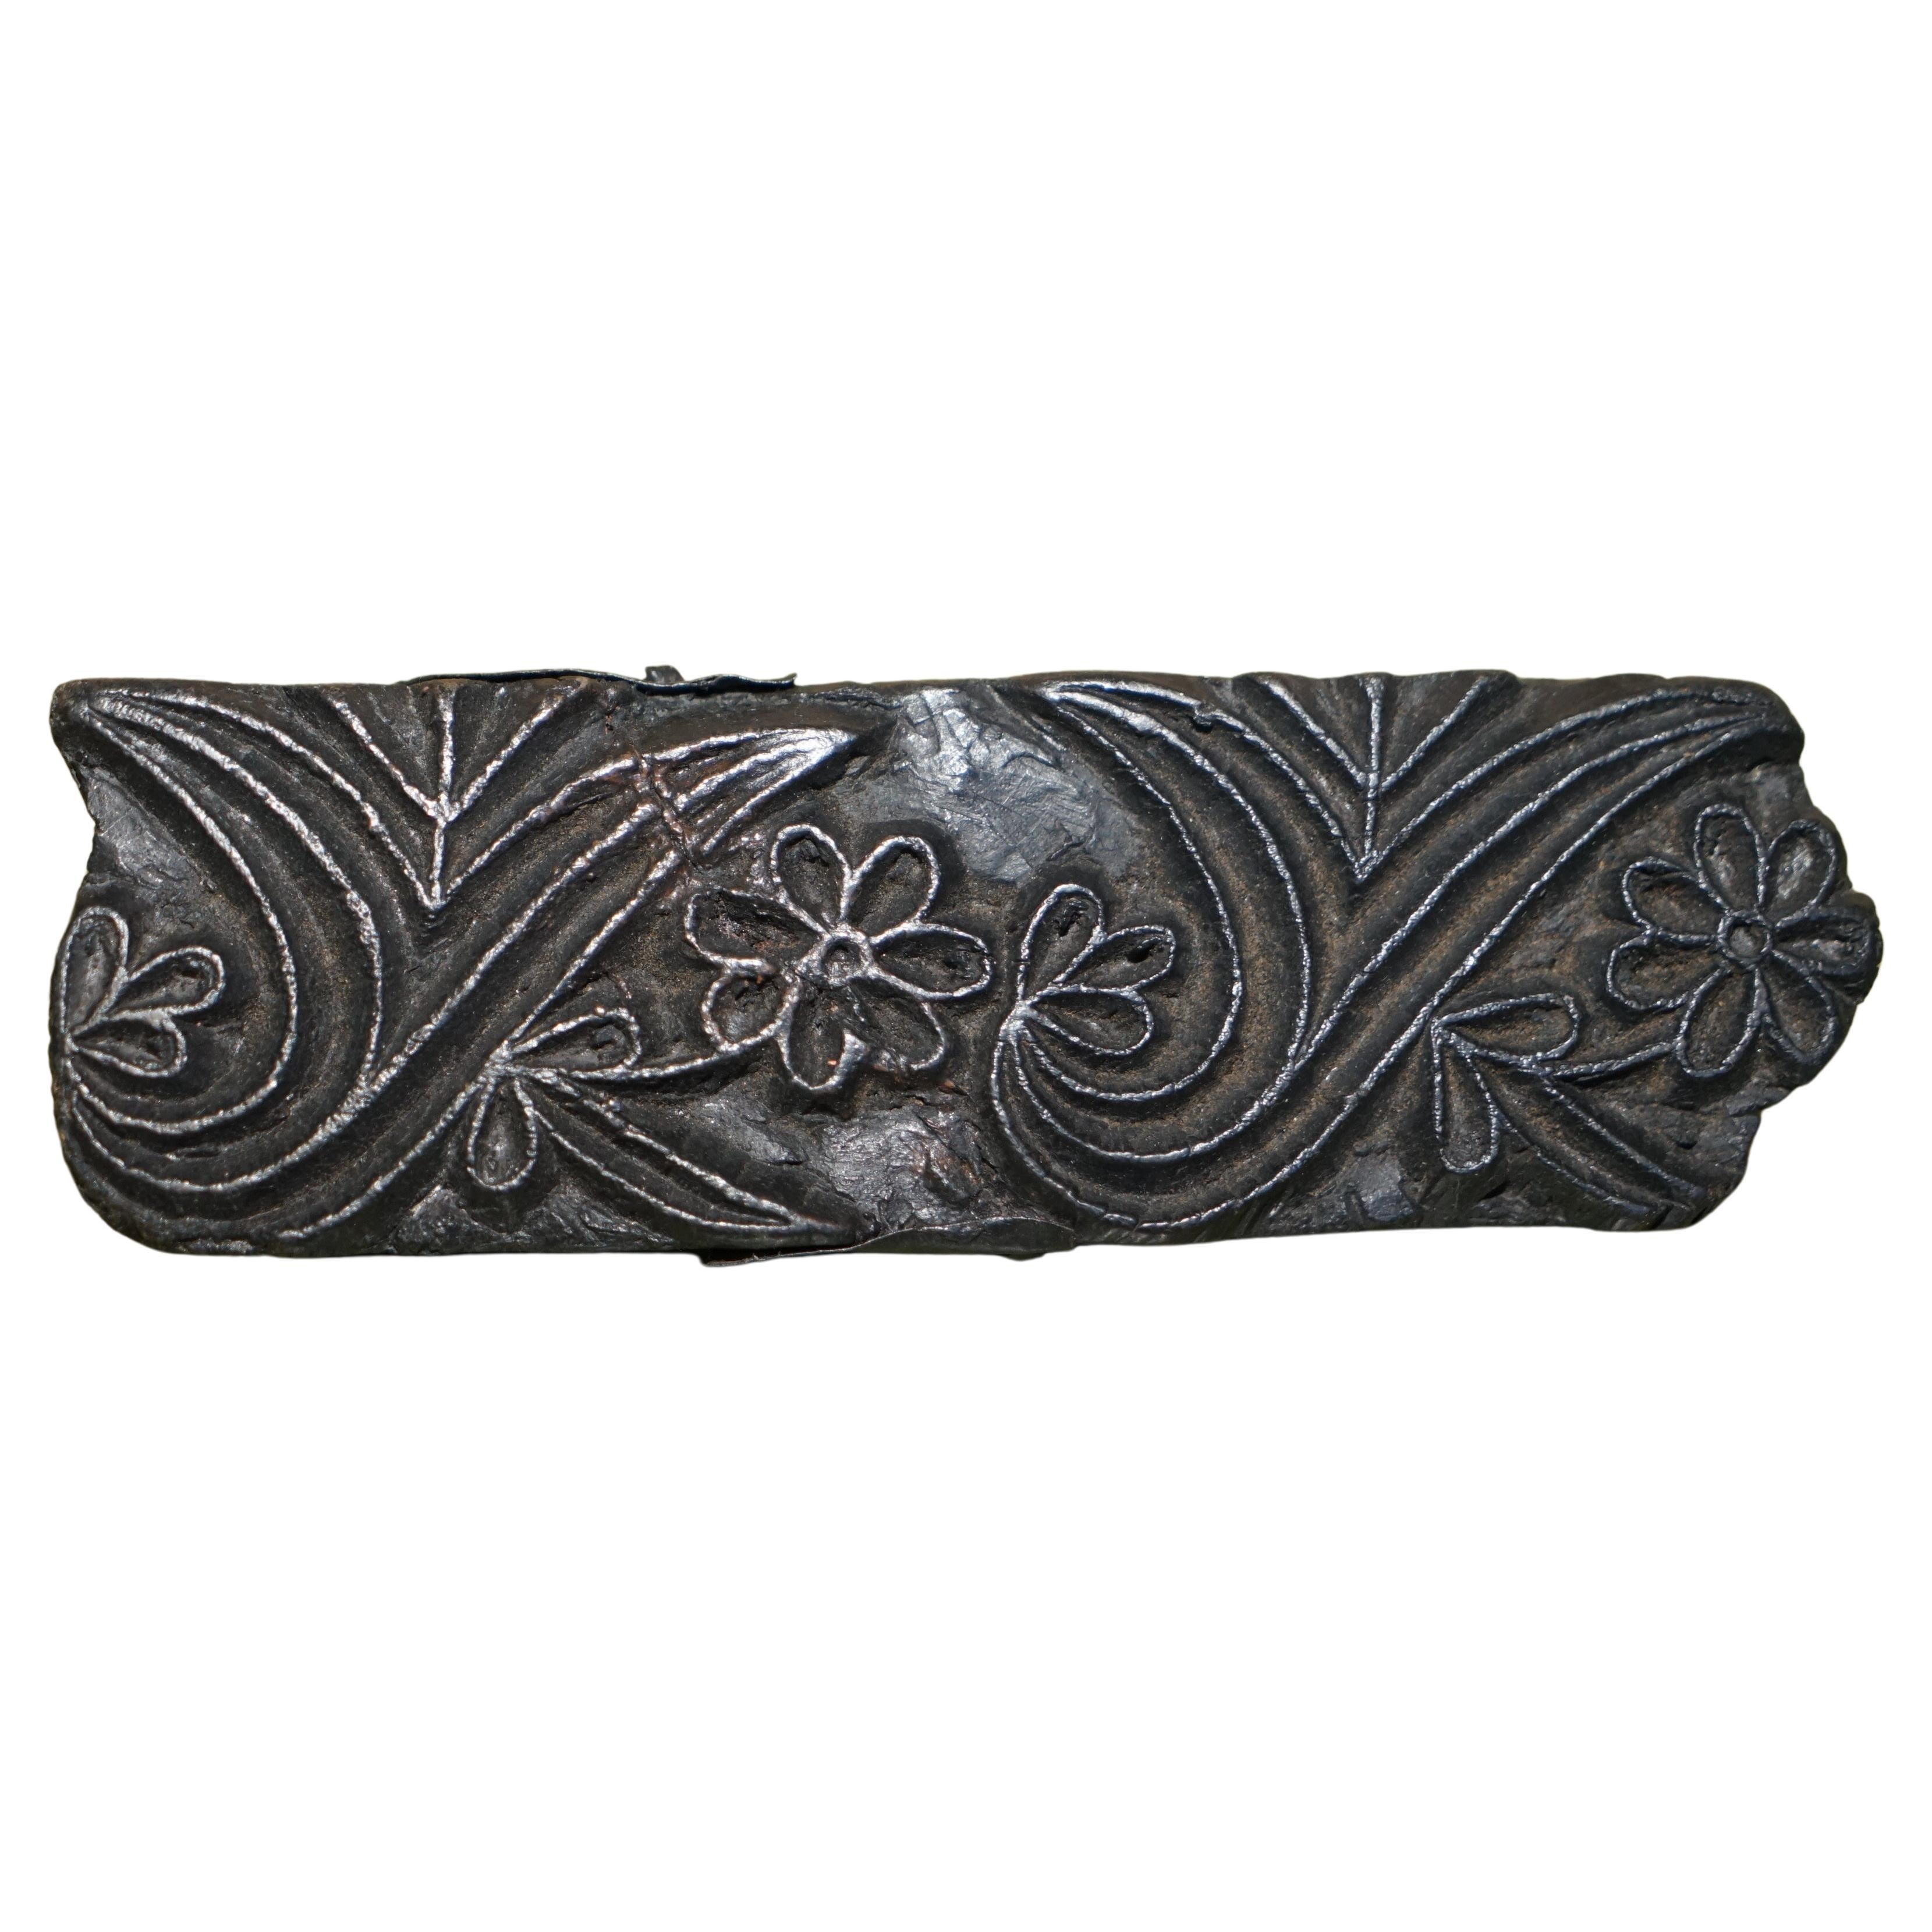 VERY COLLECTable ANTIQUE HAND CARVED SWiRLY BOARDER PRINTING BLOCK FOR WALLPAPER im Angebot